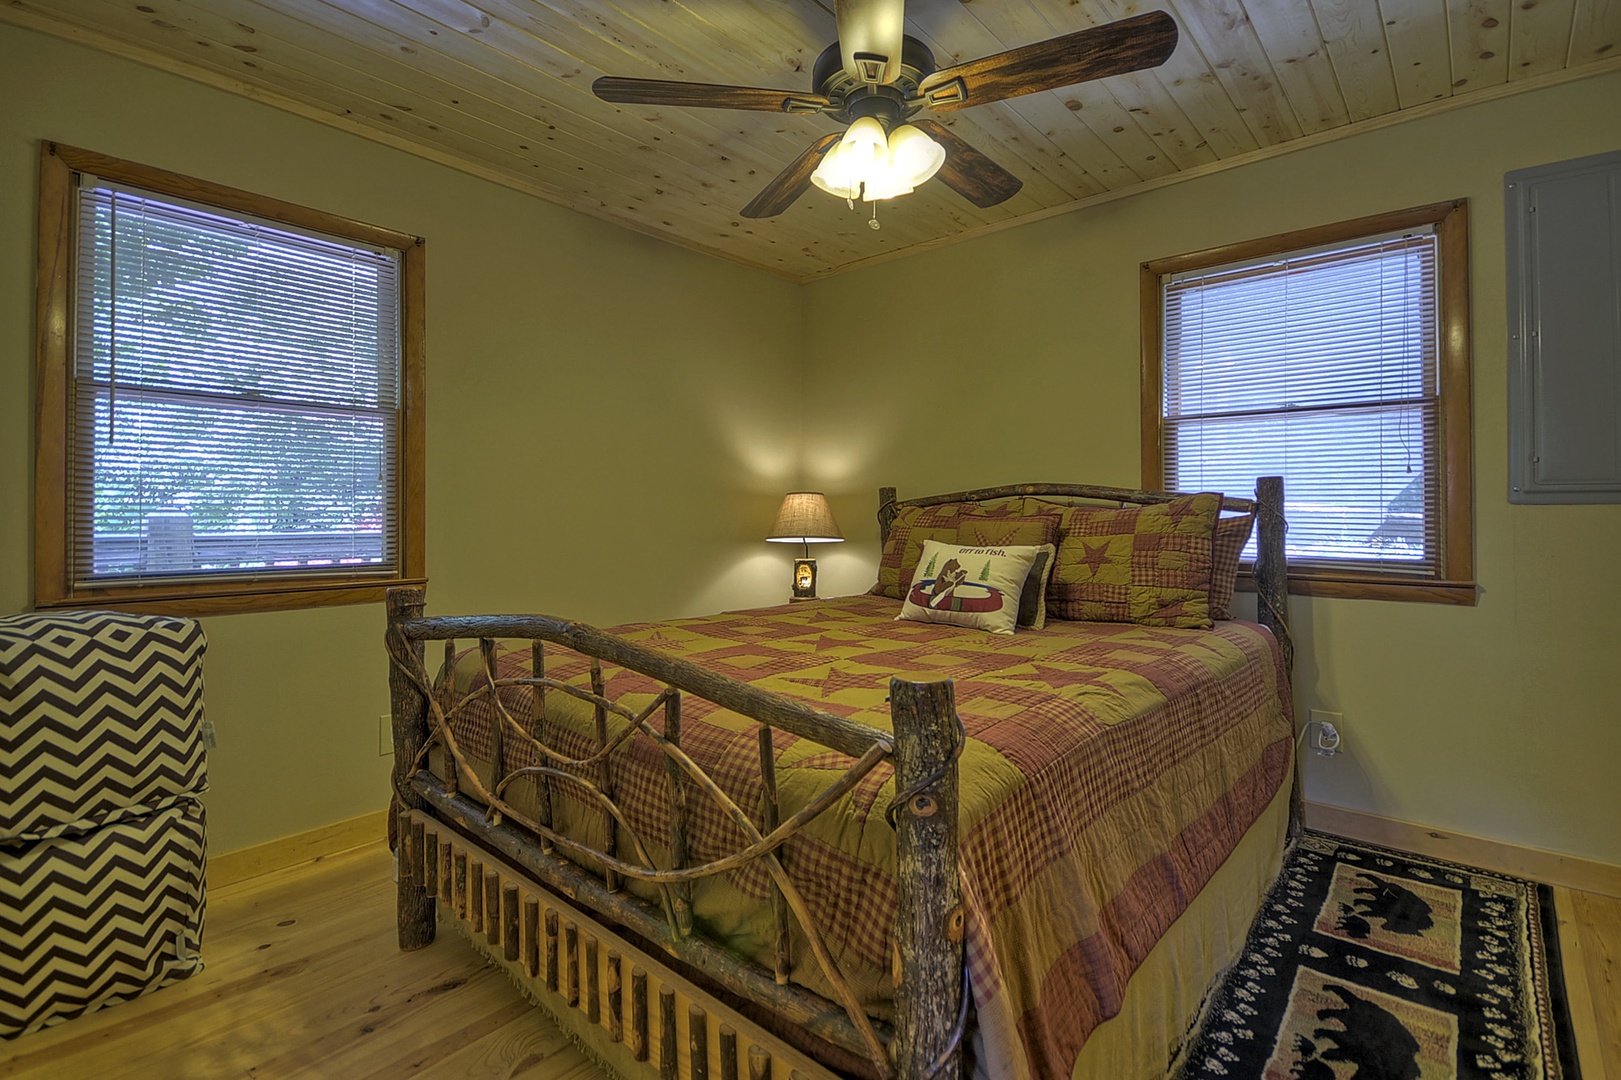 Toccoa Mist- Entry level queen bedroom area